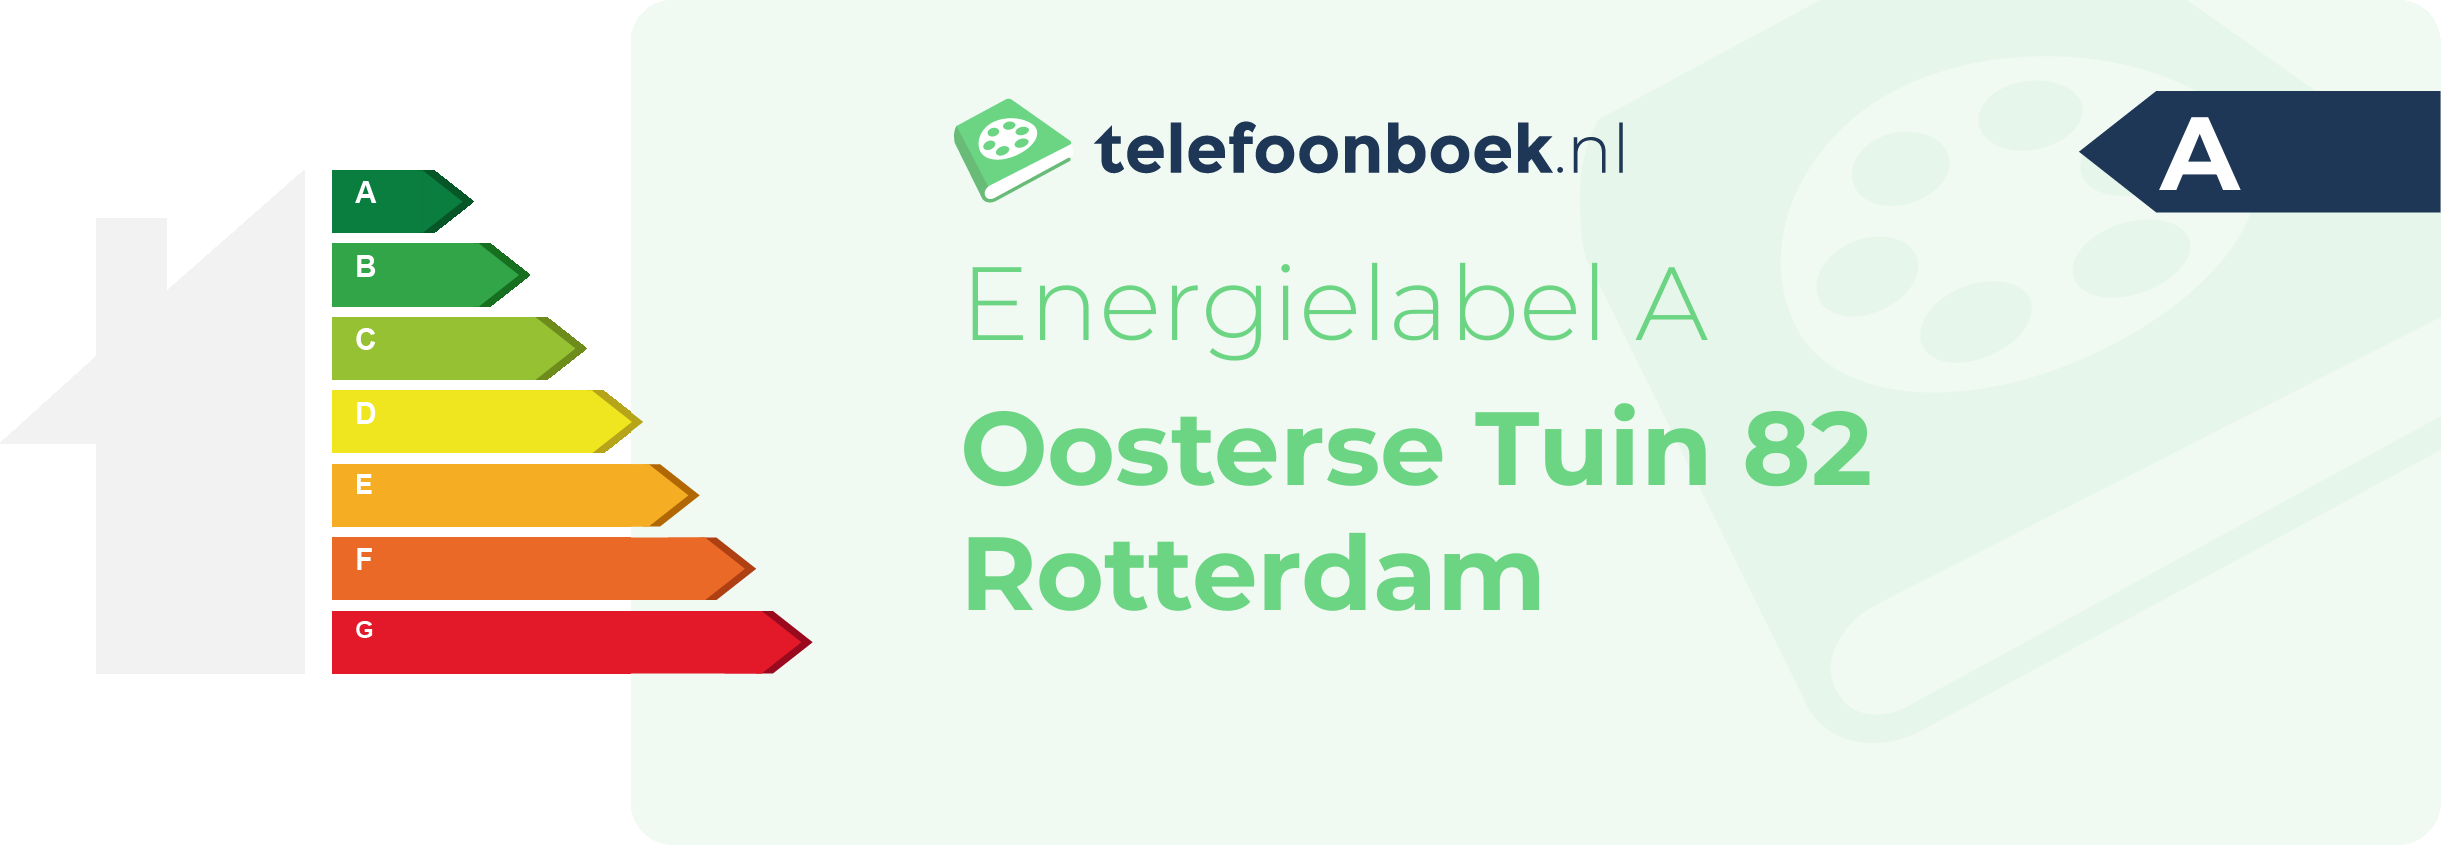 Energielabel Oosterse Tuin 82 Rotterdam